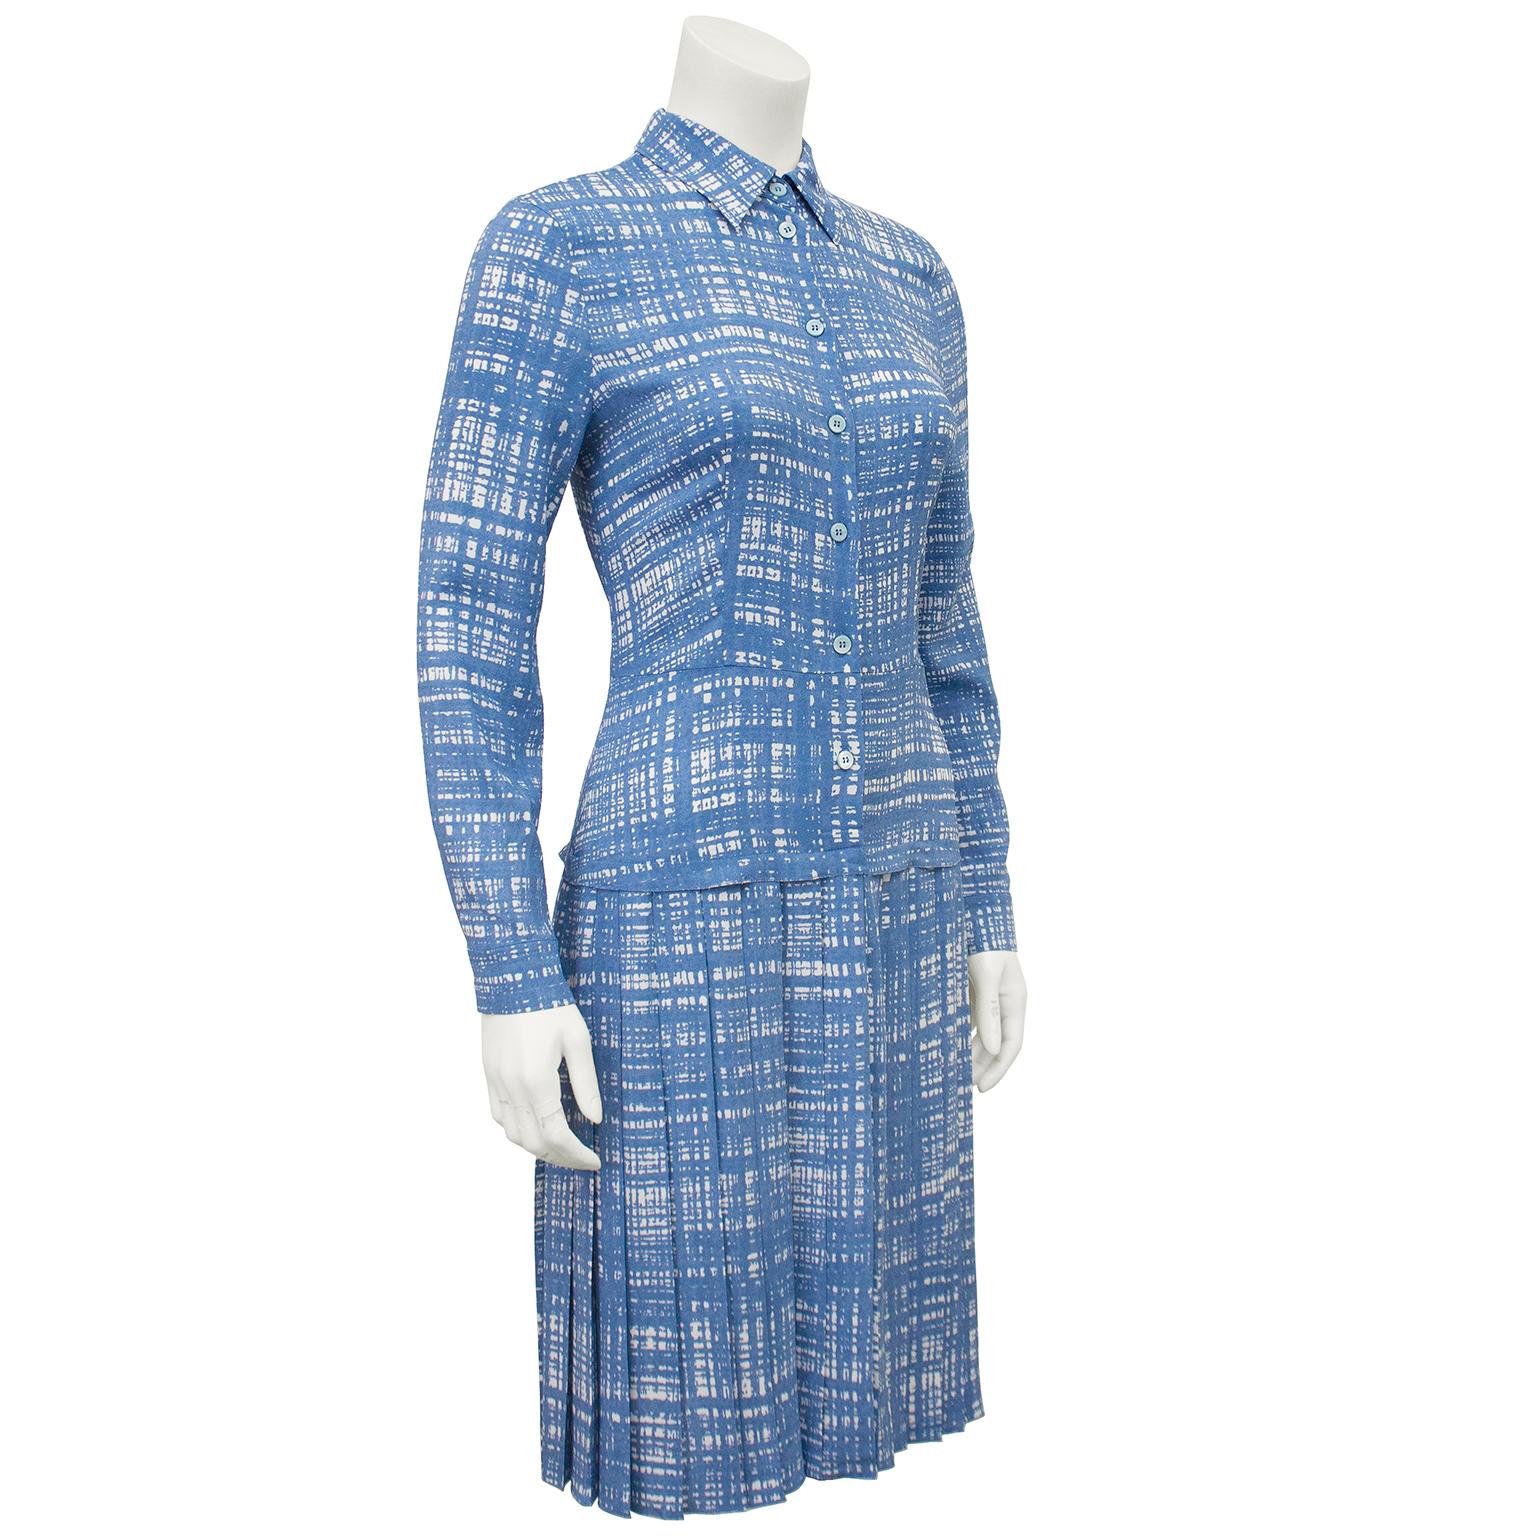 Prada blue checked shirtwaist dress from the 1996 Spring Ready to wear collection. The Graffiti checked print was featured on many pieces on the runway in navy, green and brown. This version is in a lighter blue shade on a nylon silk blend. The